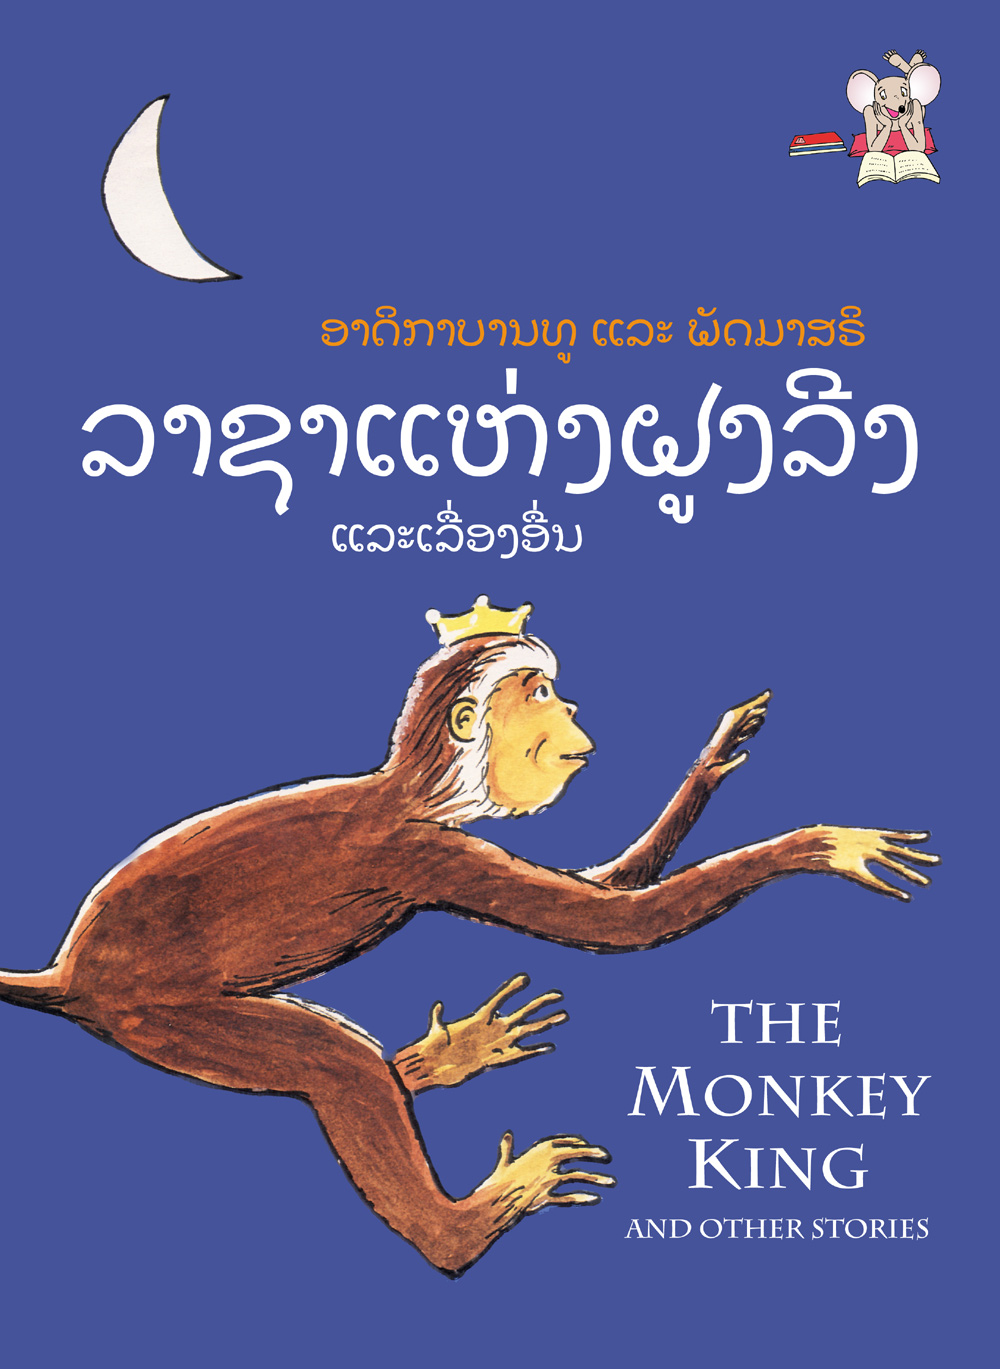 The Monkey King large book cover, published in Lao and English